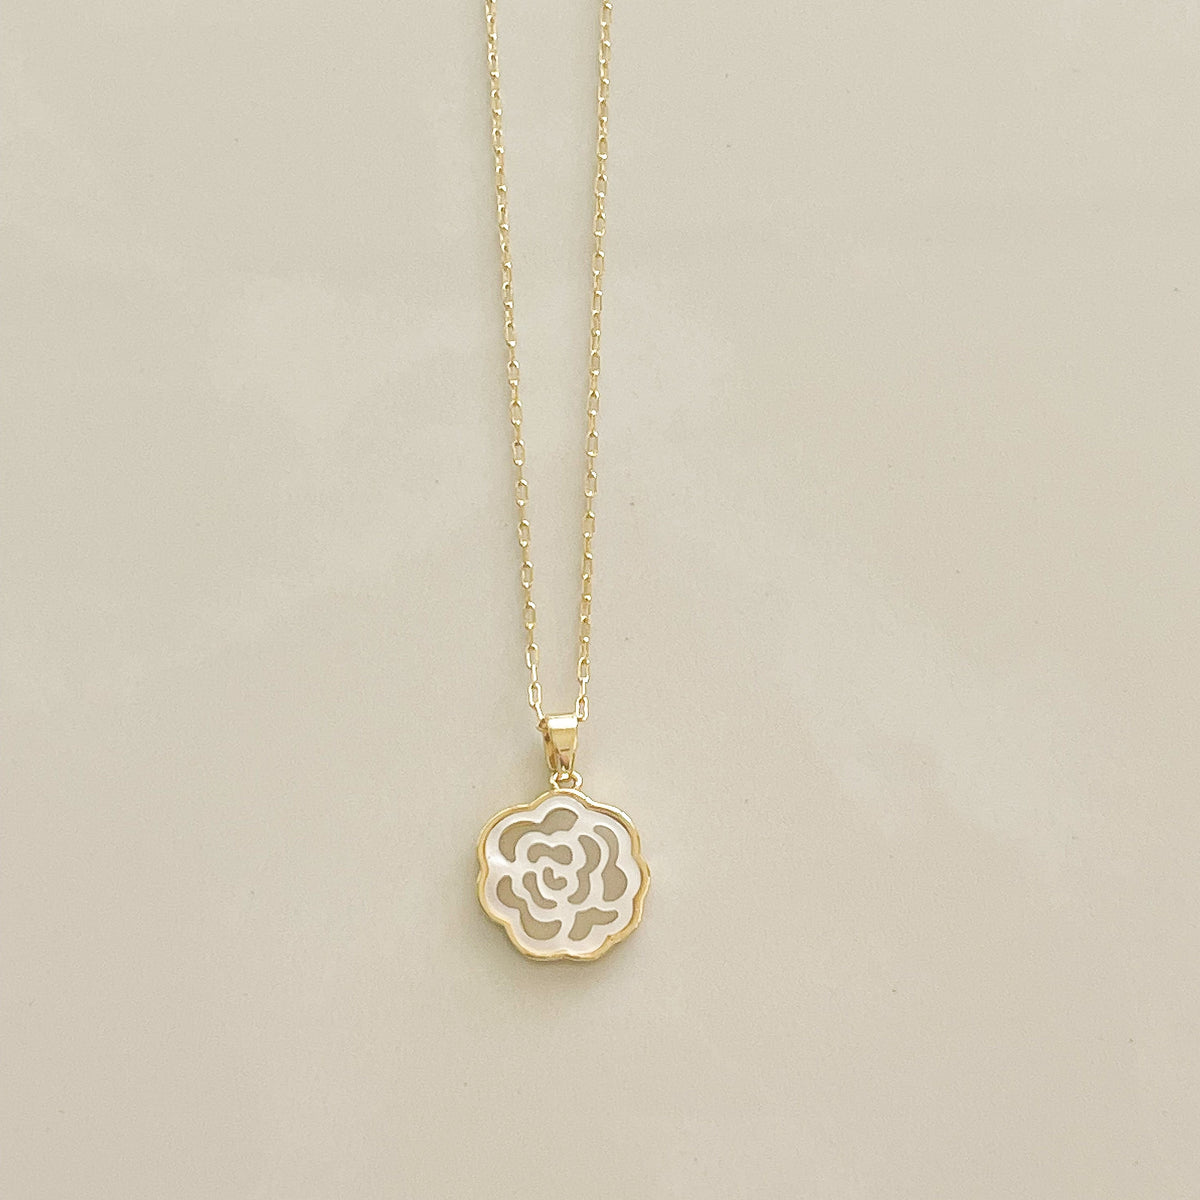 Blooming Happiness Flower Charm Necklace